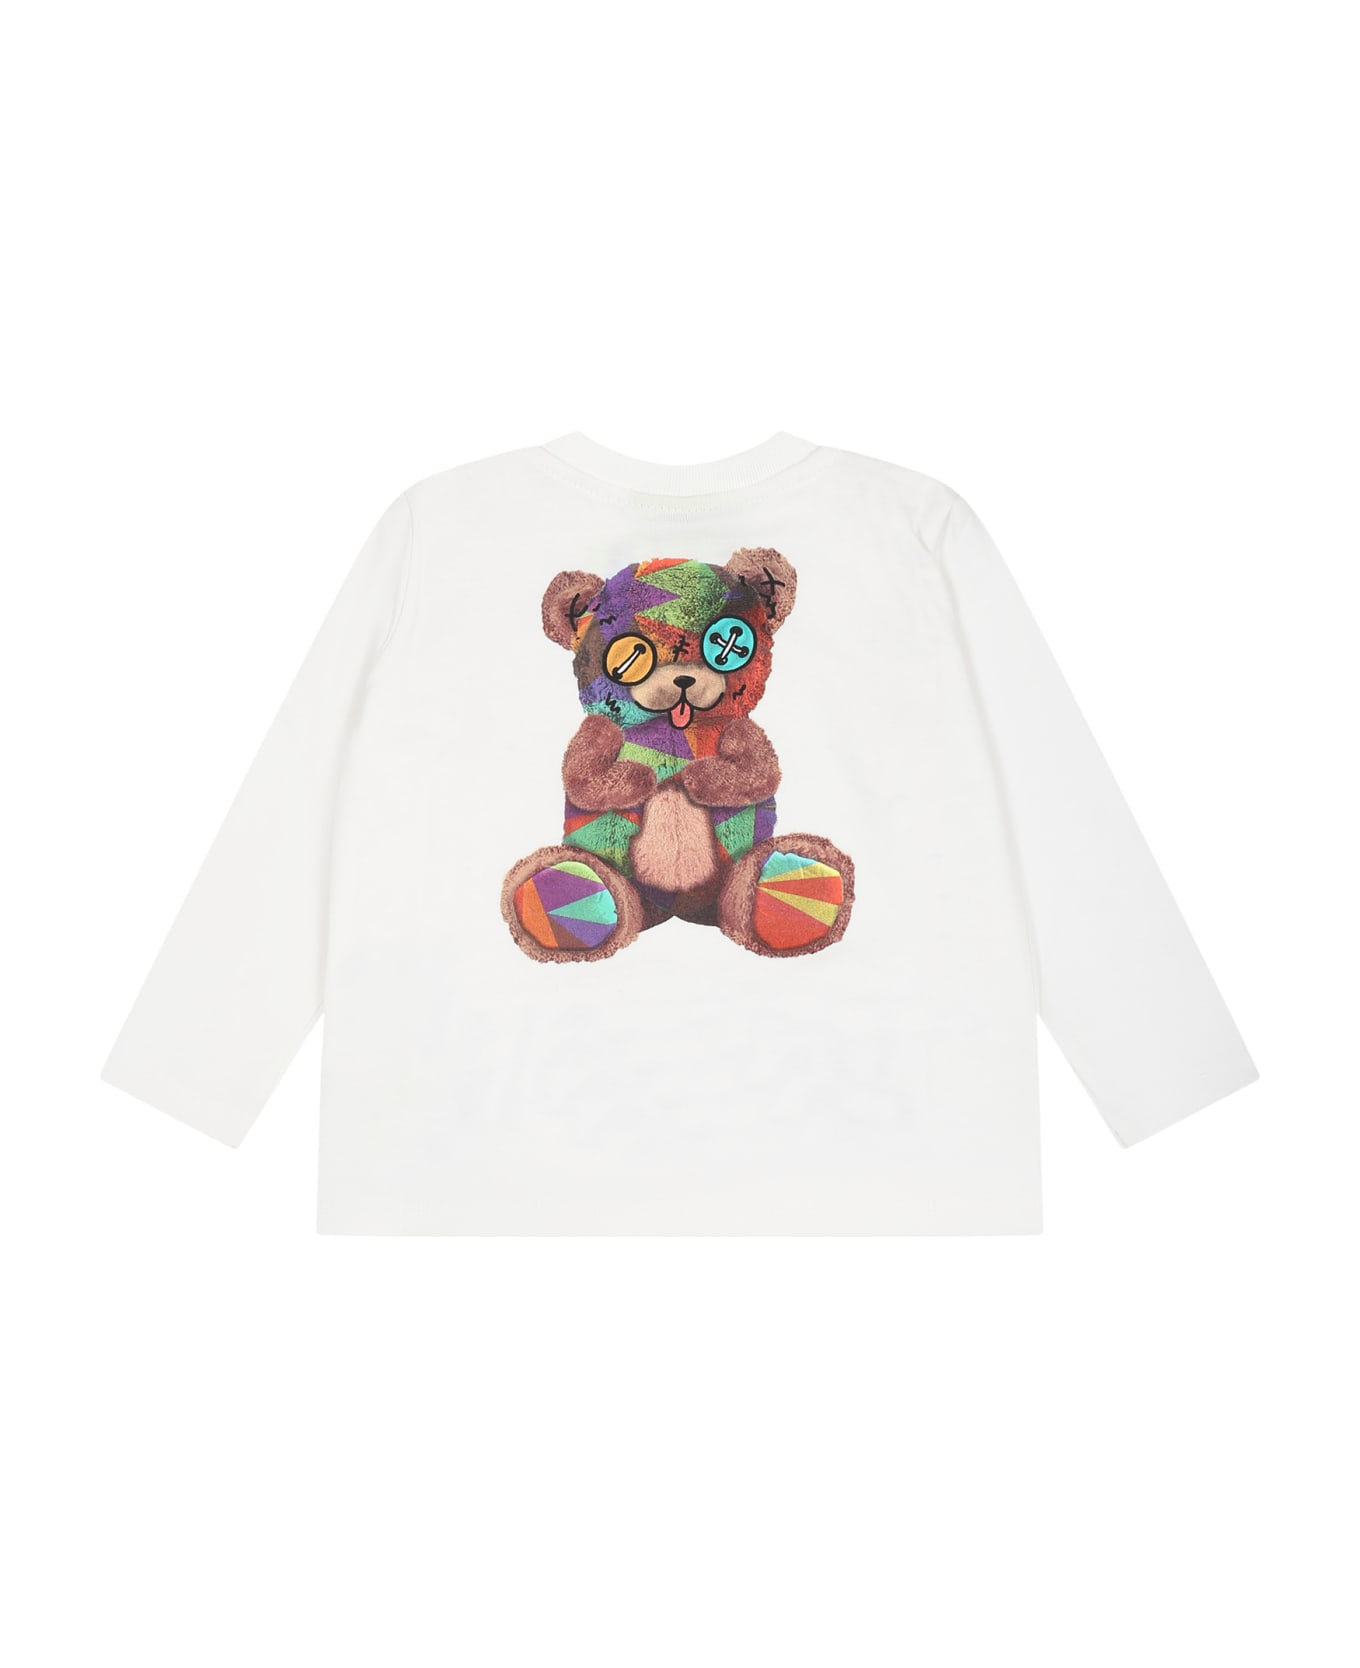 Barrow White T-shirt For Baby Kids With Logo And Teddy Bear - Off white Tシャツ＆ポロシャツ